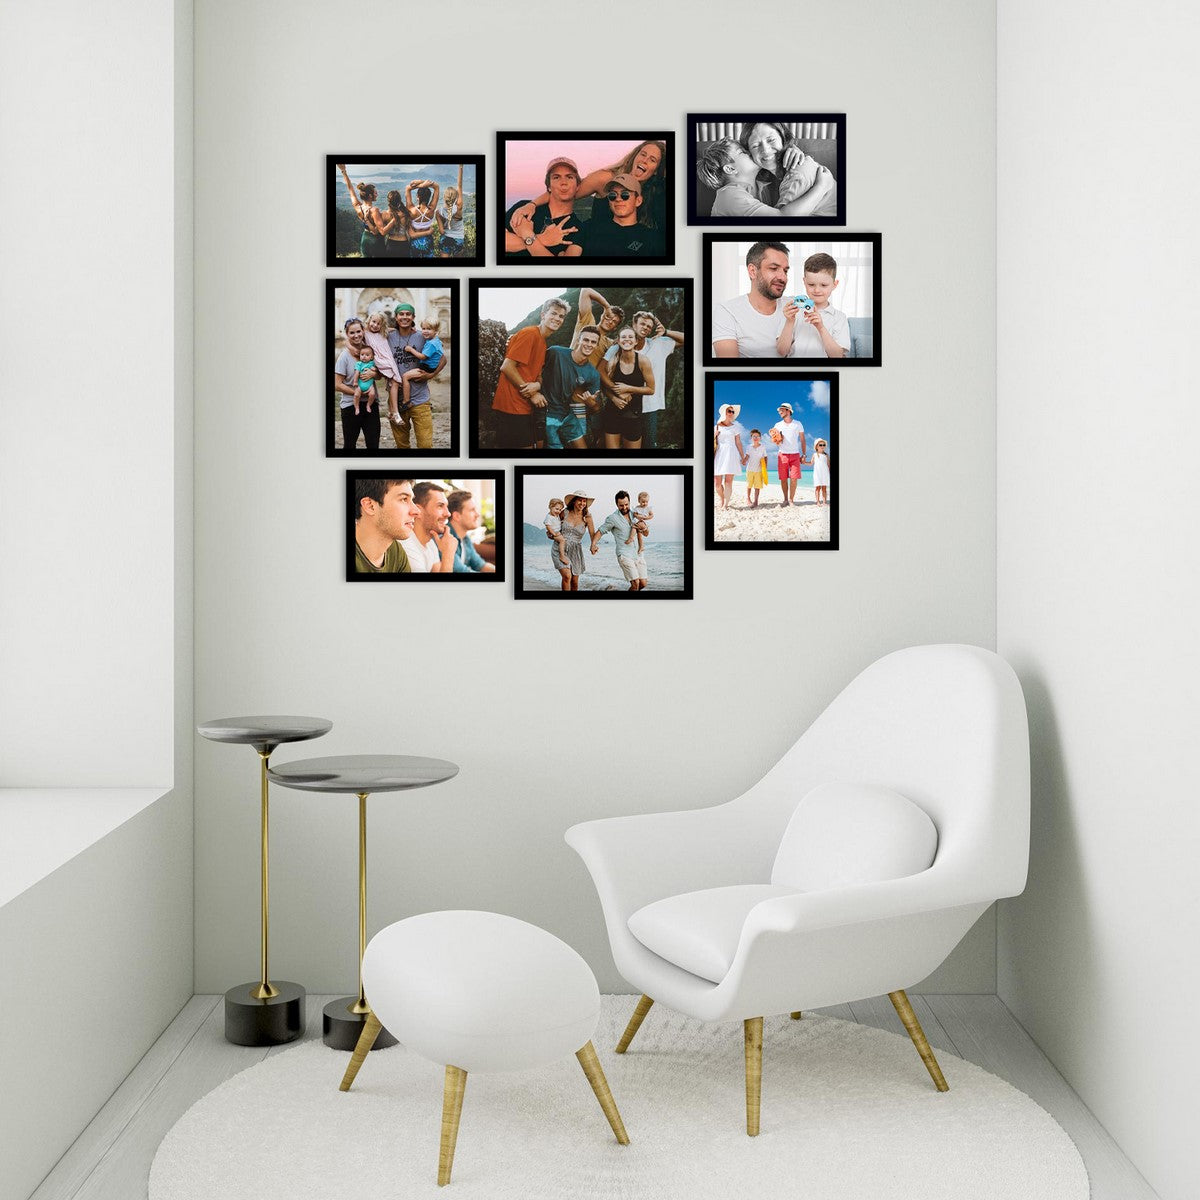 Memory Wall Collage Photo Frame - Set of 9 Photo Frames for 3 Photos of 5"x7", 5 Photos of 6"x8", 1 Photos of 8"x10" 2